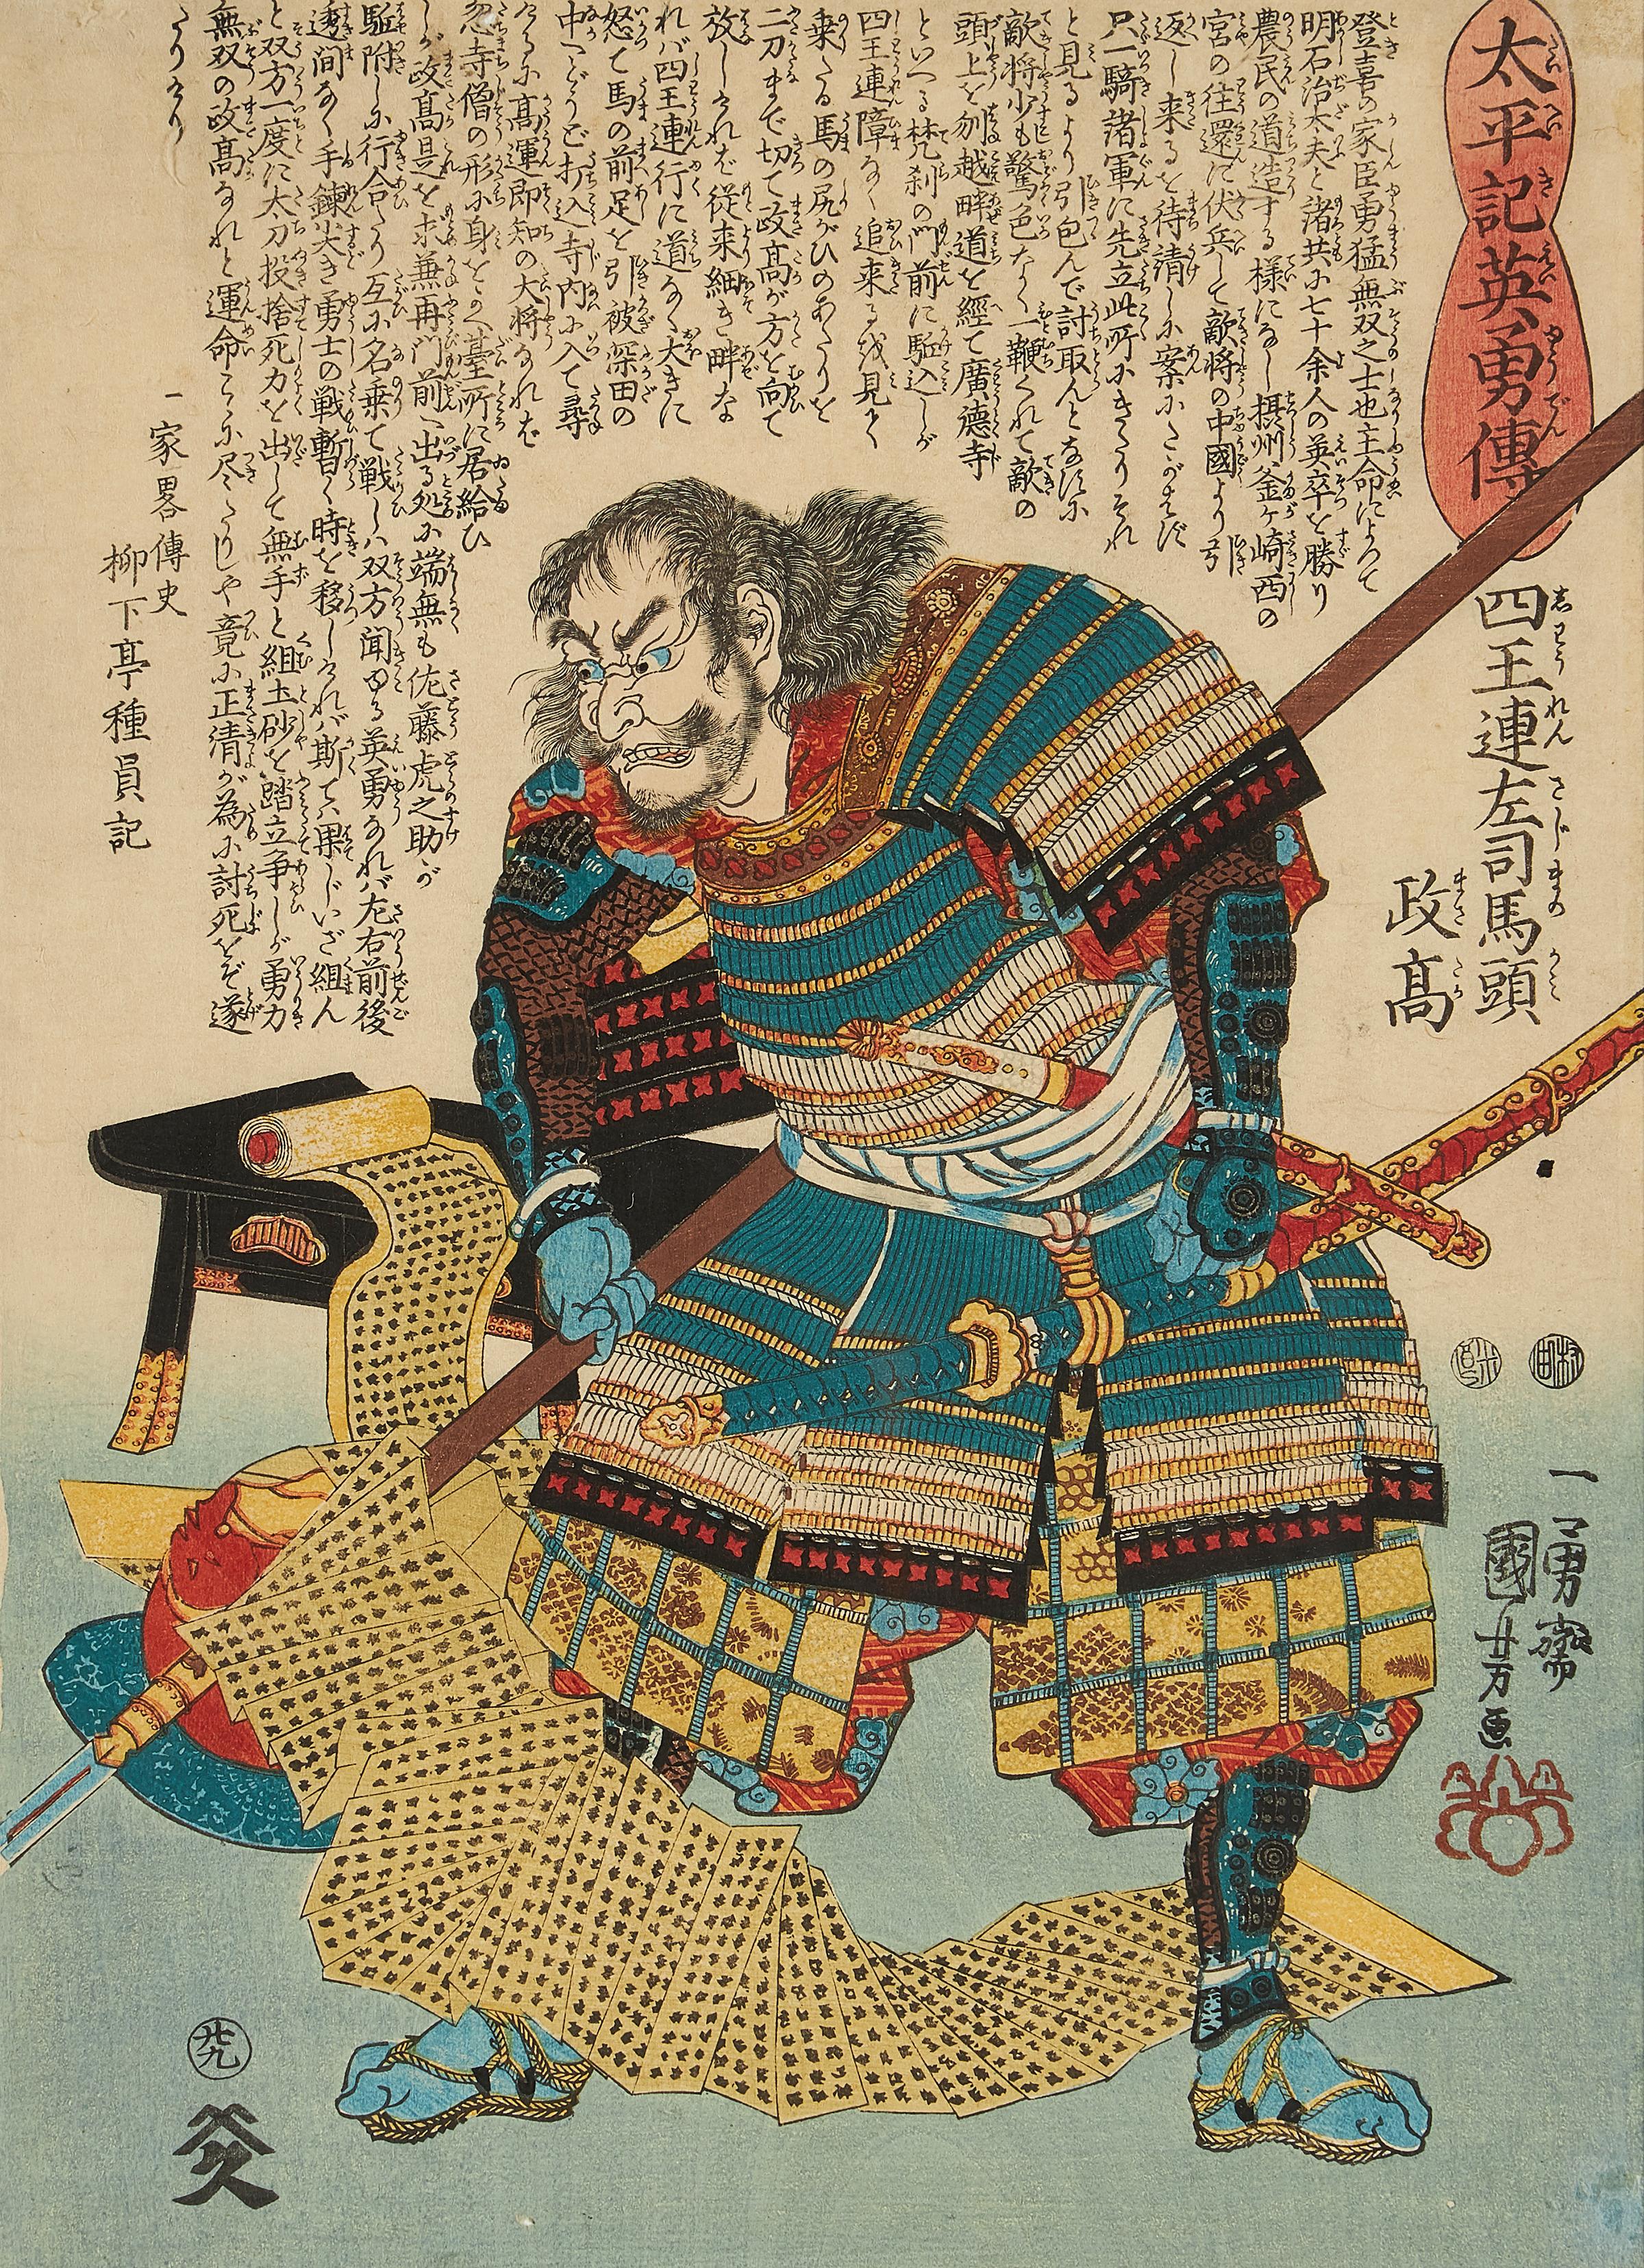 Utagawa Kuniyoshi (Japan, 1798-1861), a set of nine Japanese woodblock prints (ukiyo-e) from the series 'Taiheiki Eiyuden', or 'Heroes of the Great Peace' published between 1846-1847, late do period.

The set is comprised of: no. 3 'Chibata